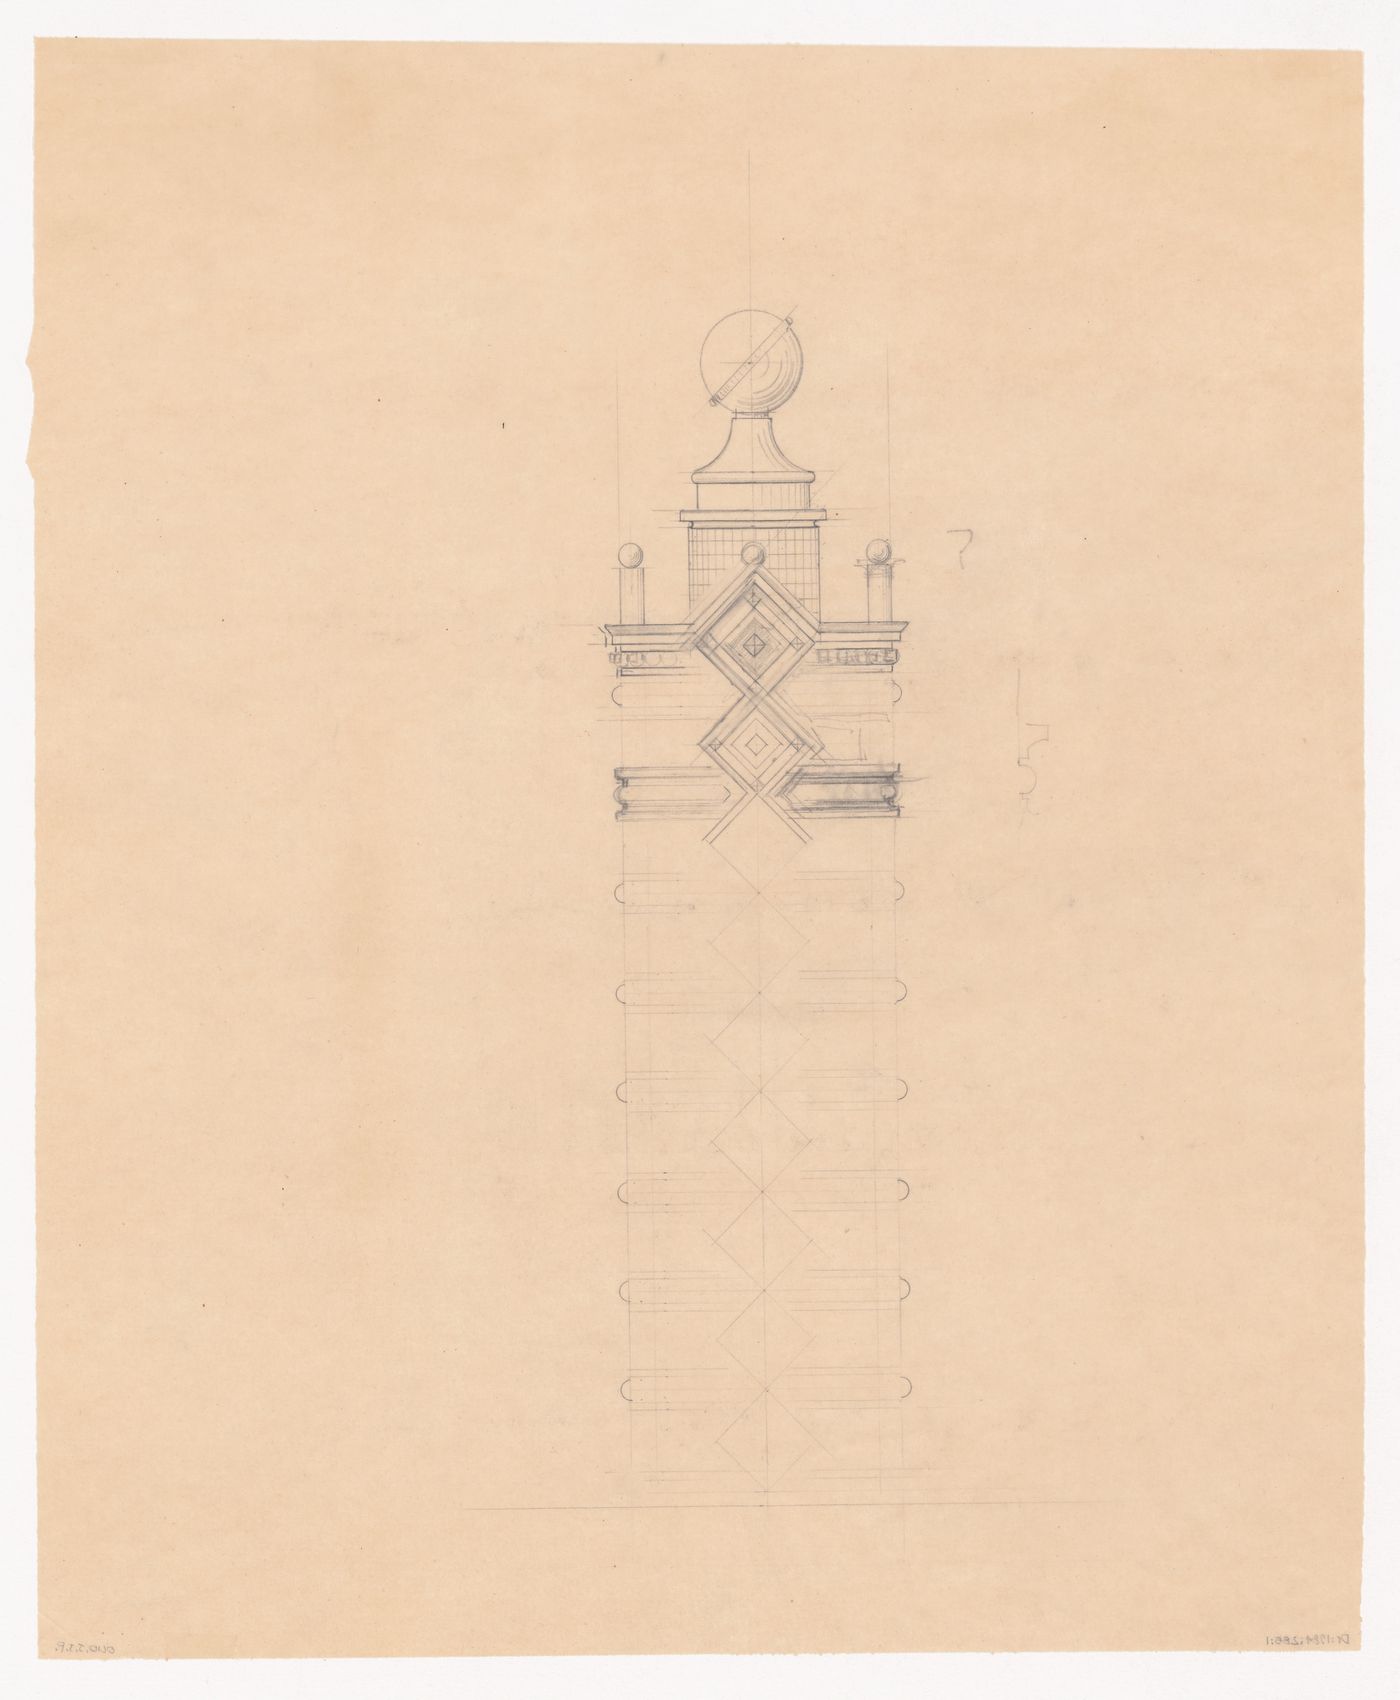 Elevation for a tower for a model for a city hall for the reconstruction of the Hofplein (city centre), Rotterdam, Netherlands